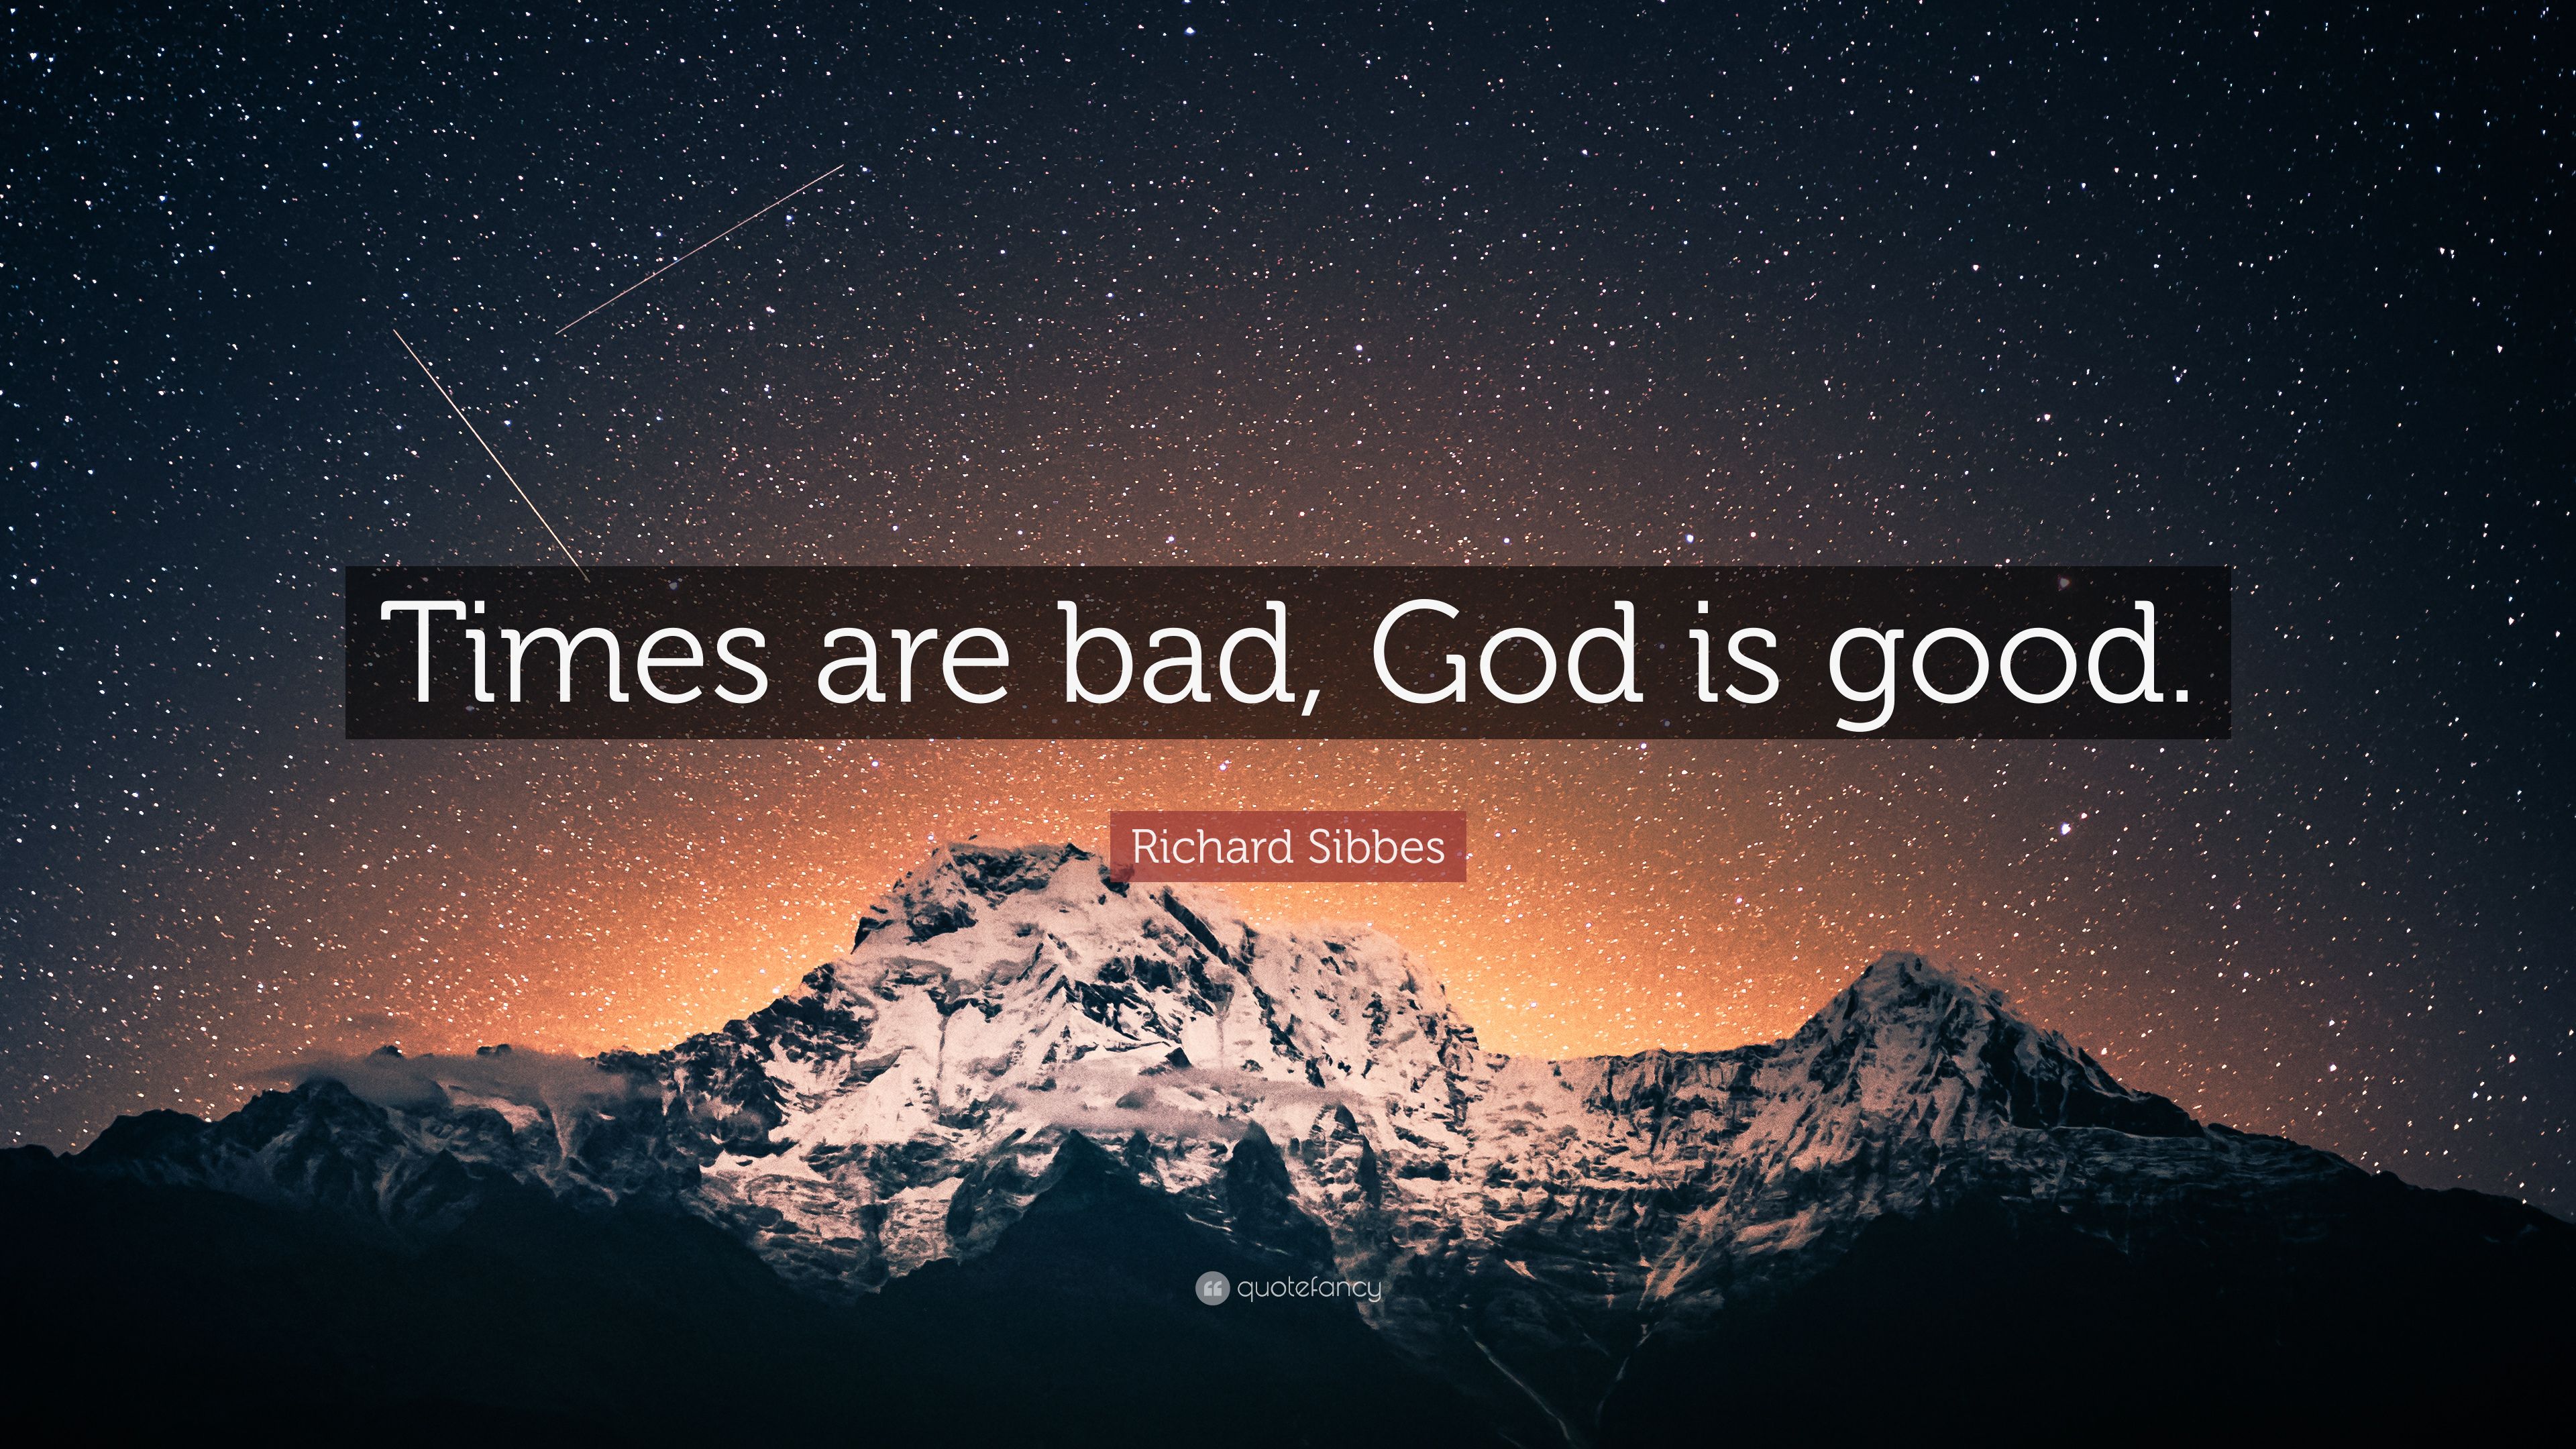 Richard Sibbes Quote: “Times are bad, God is good.” (9 wallpaper)